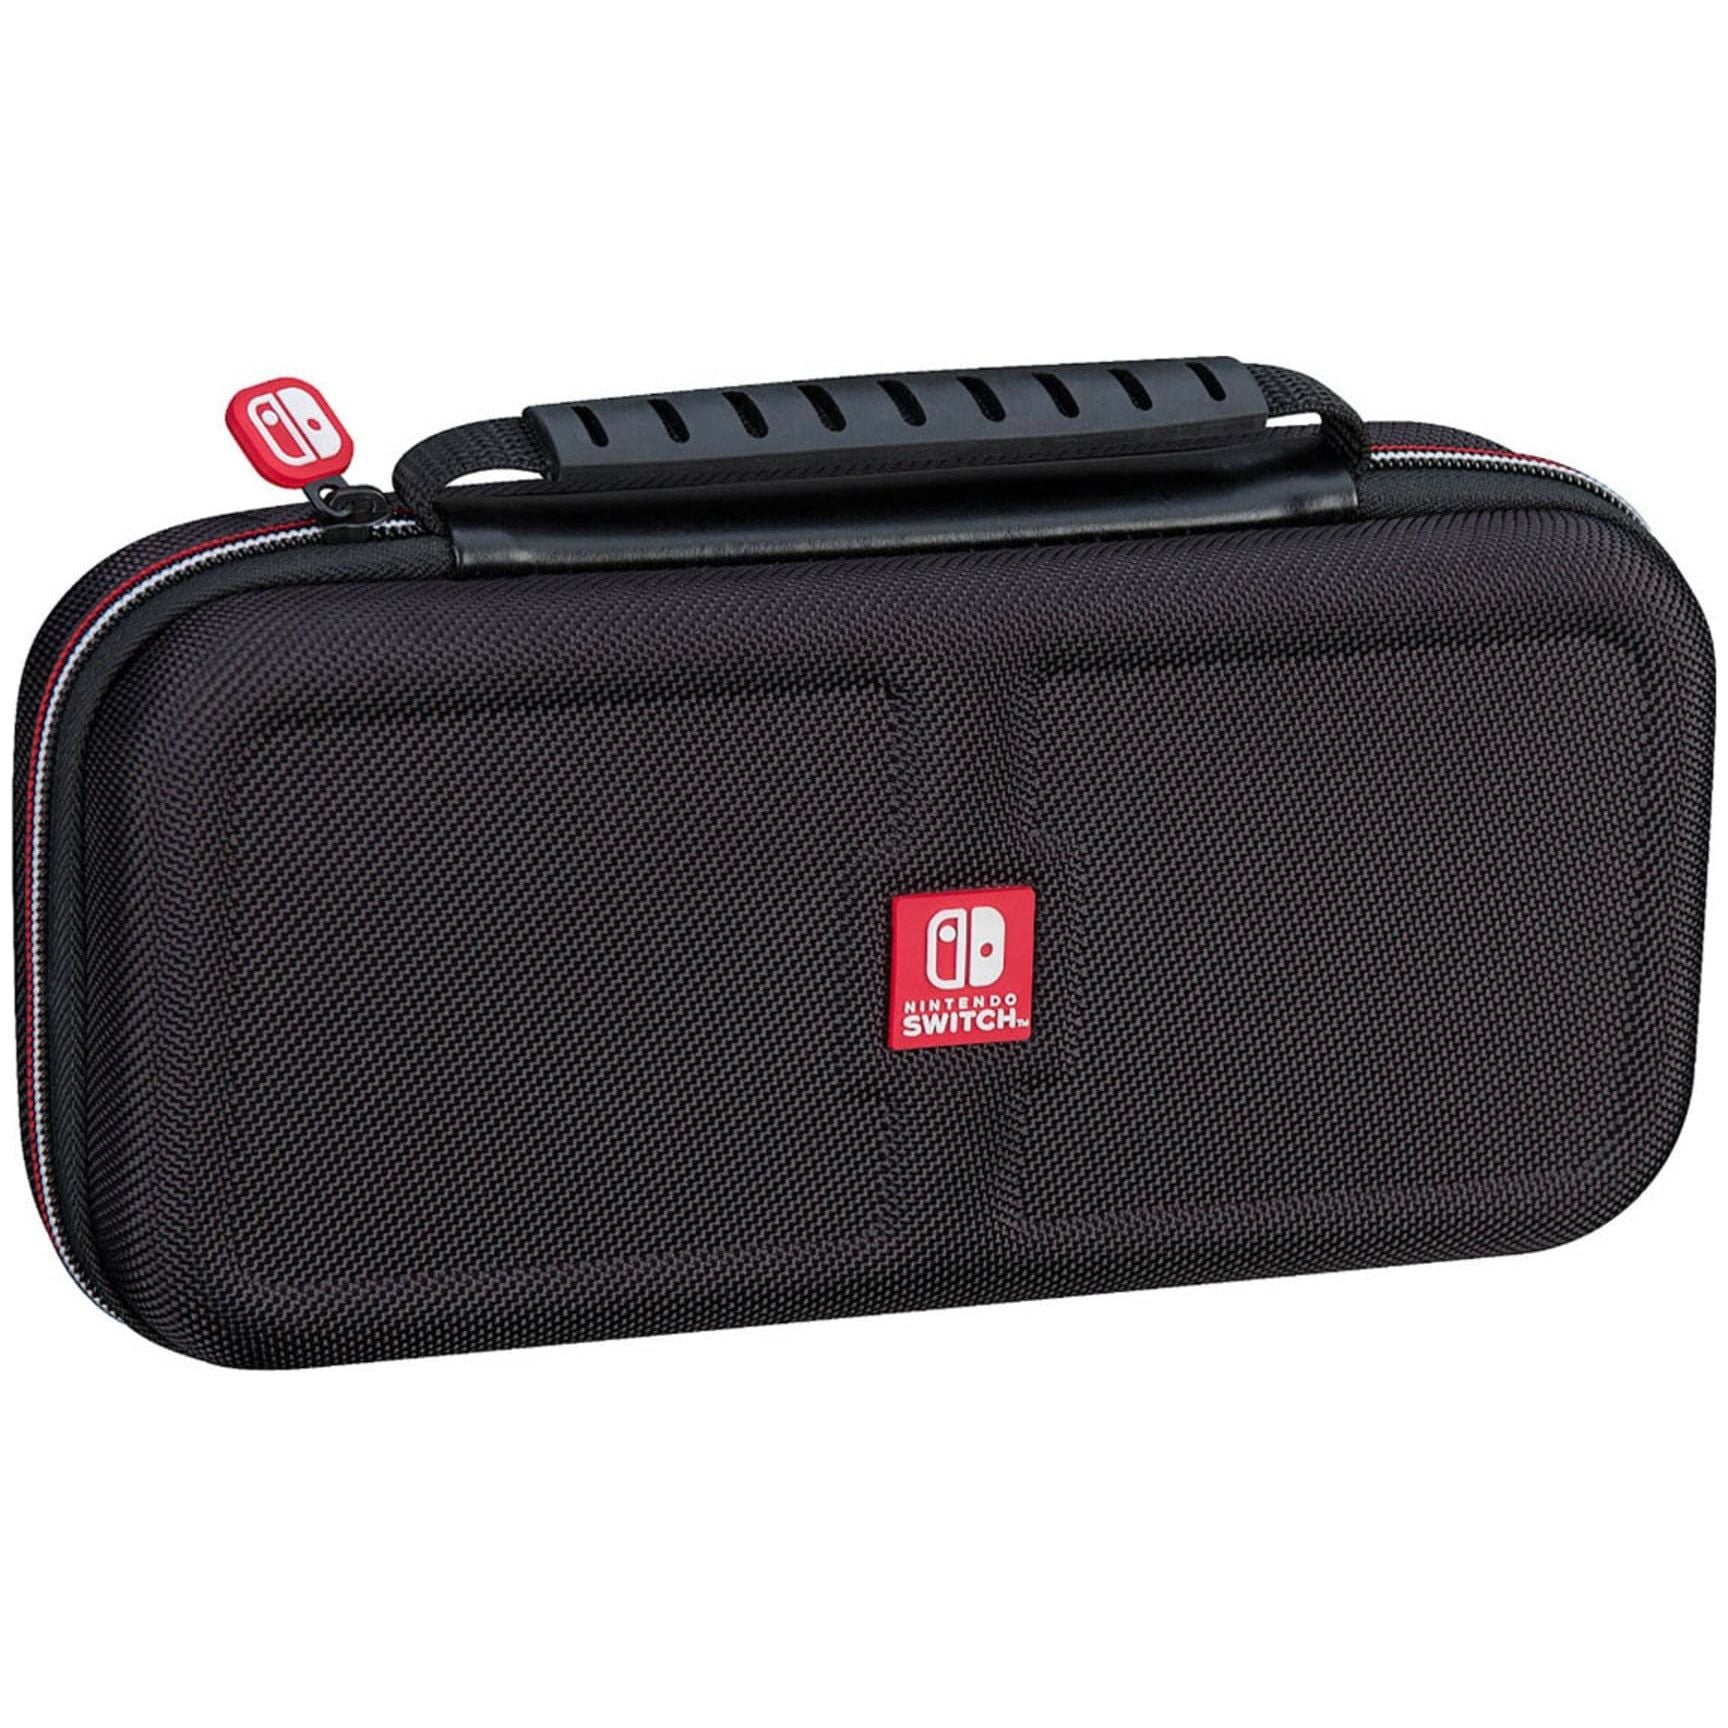 Nintendo Switch System Carry Case